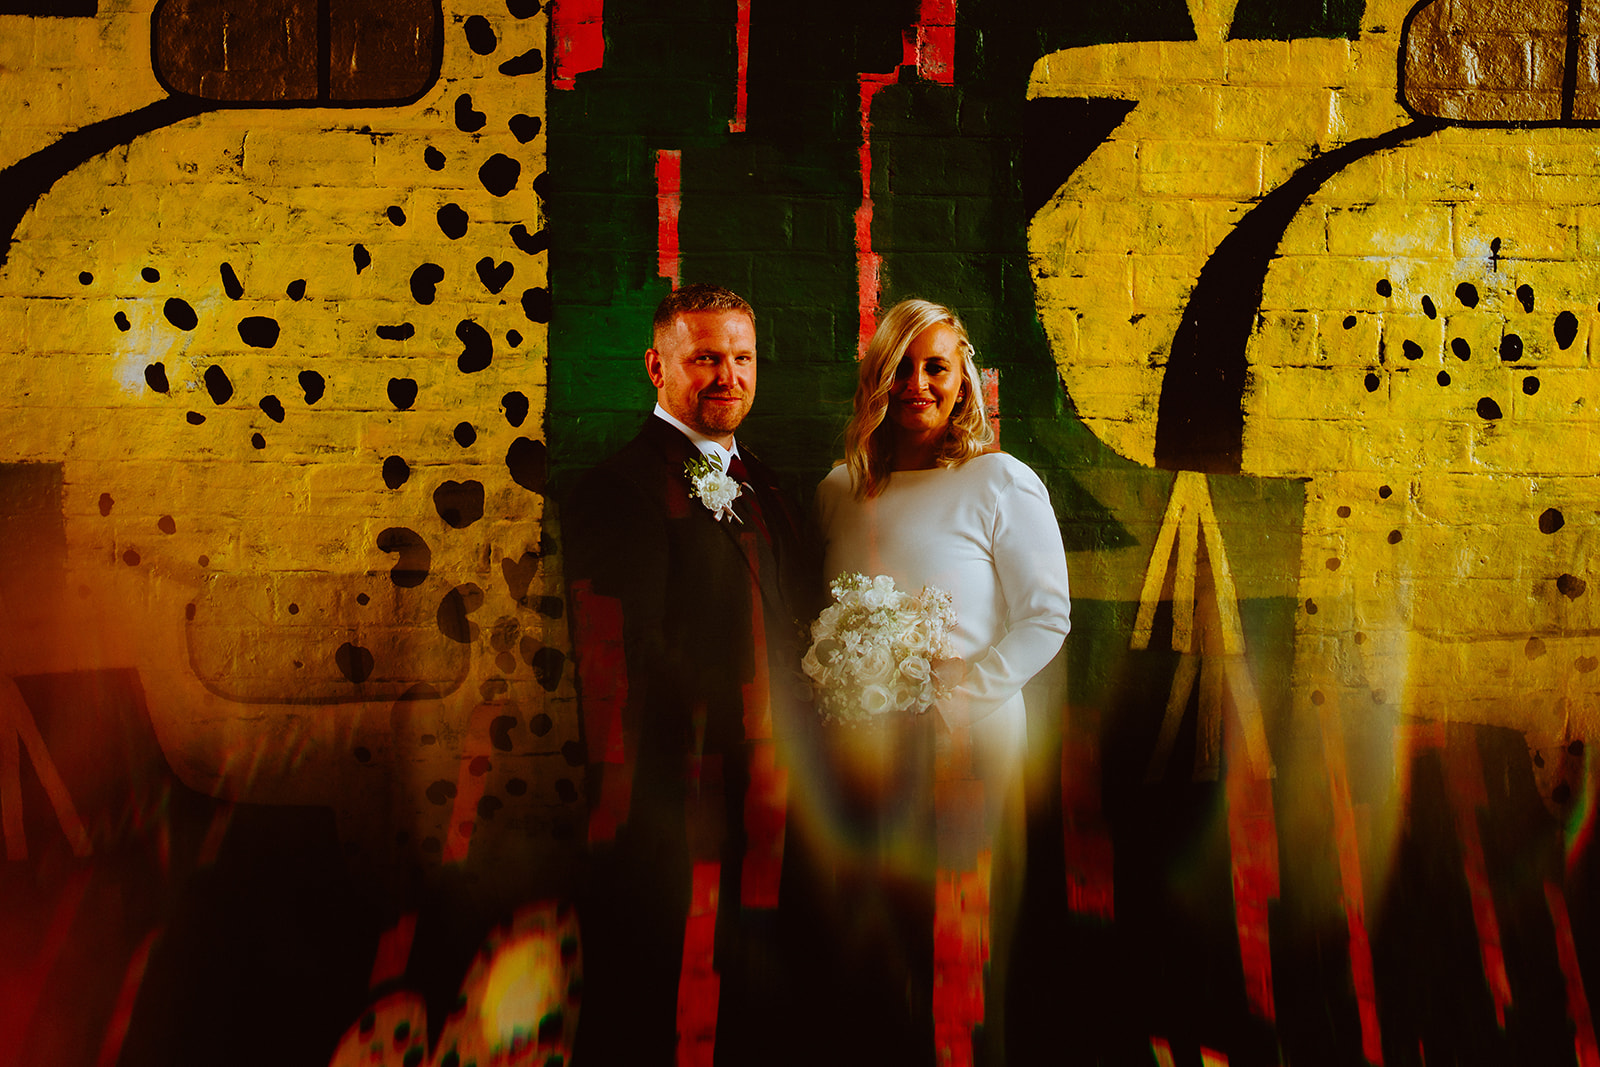 Wedding couple, standing in front of graffiti mural in Glasgow.